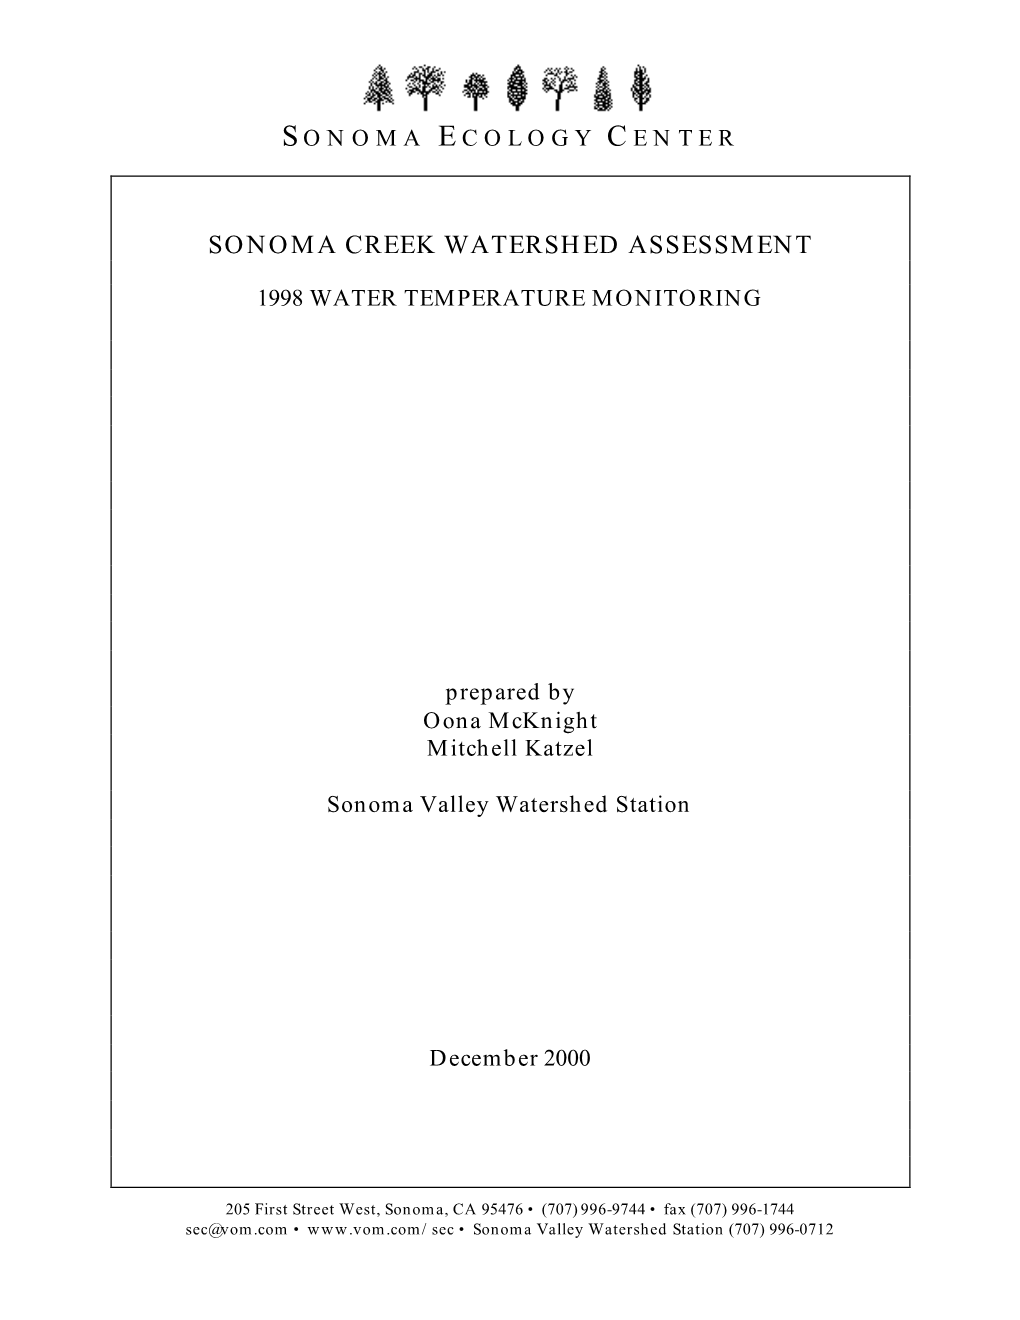 Sonoma Creek Watershed Assessment